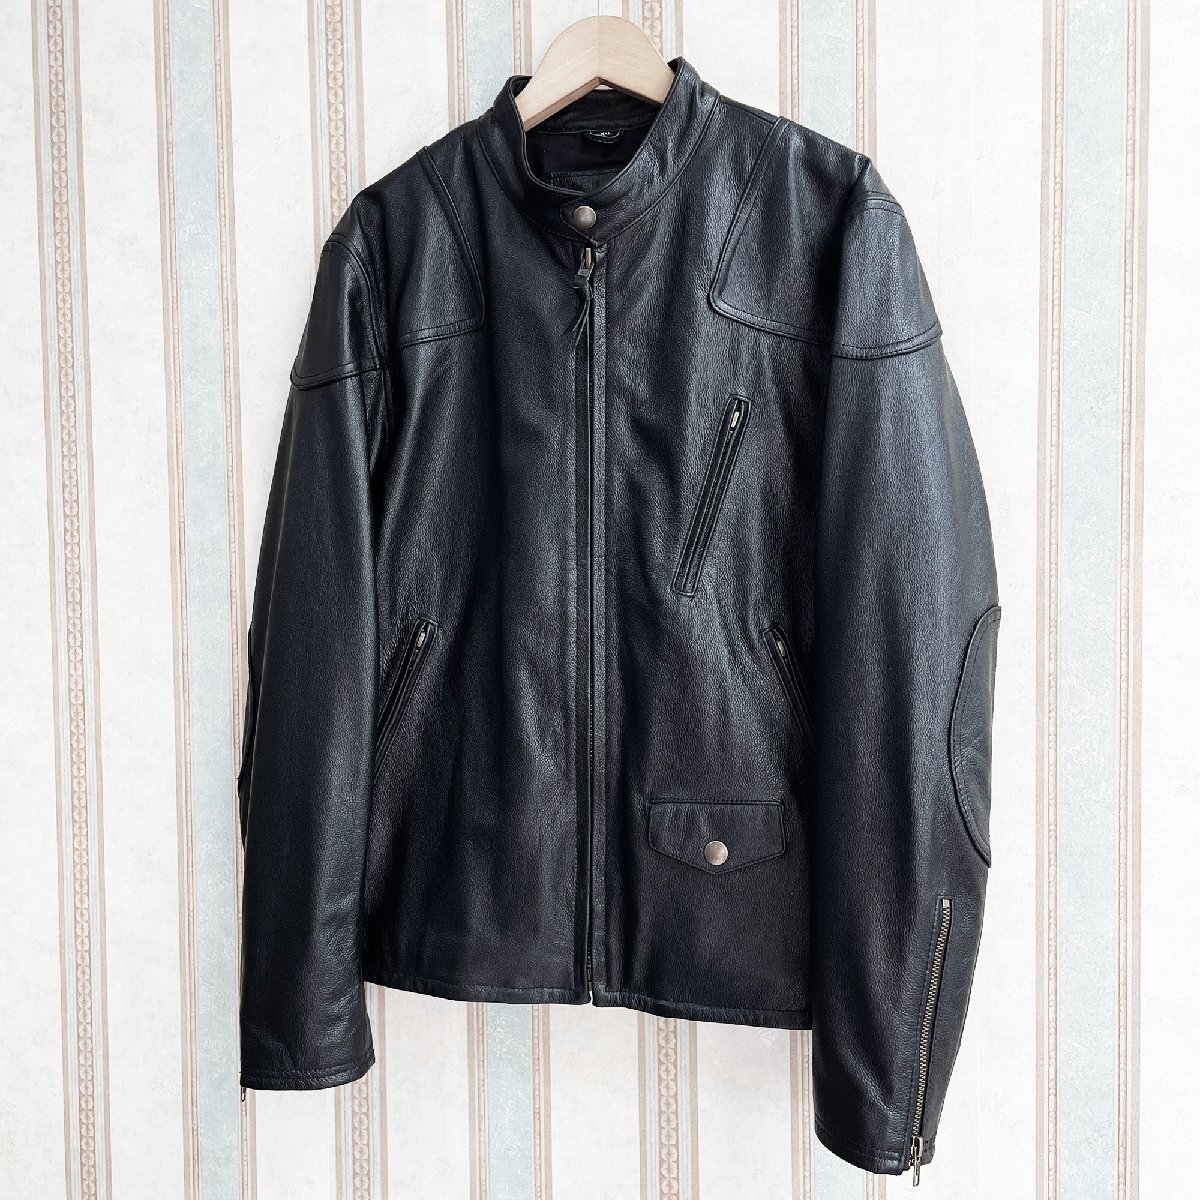  high class regular price 16 ten thousand FRANKLIN MUSK* America * New York departure leather jacket fine quality cow leather -ply thickness rare Rider's leather jacket motorcycle size 2